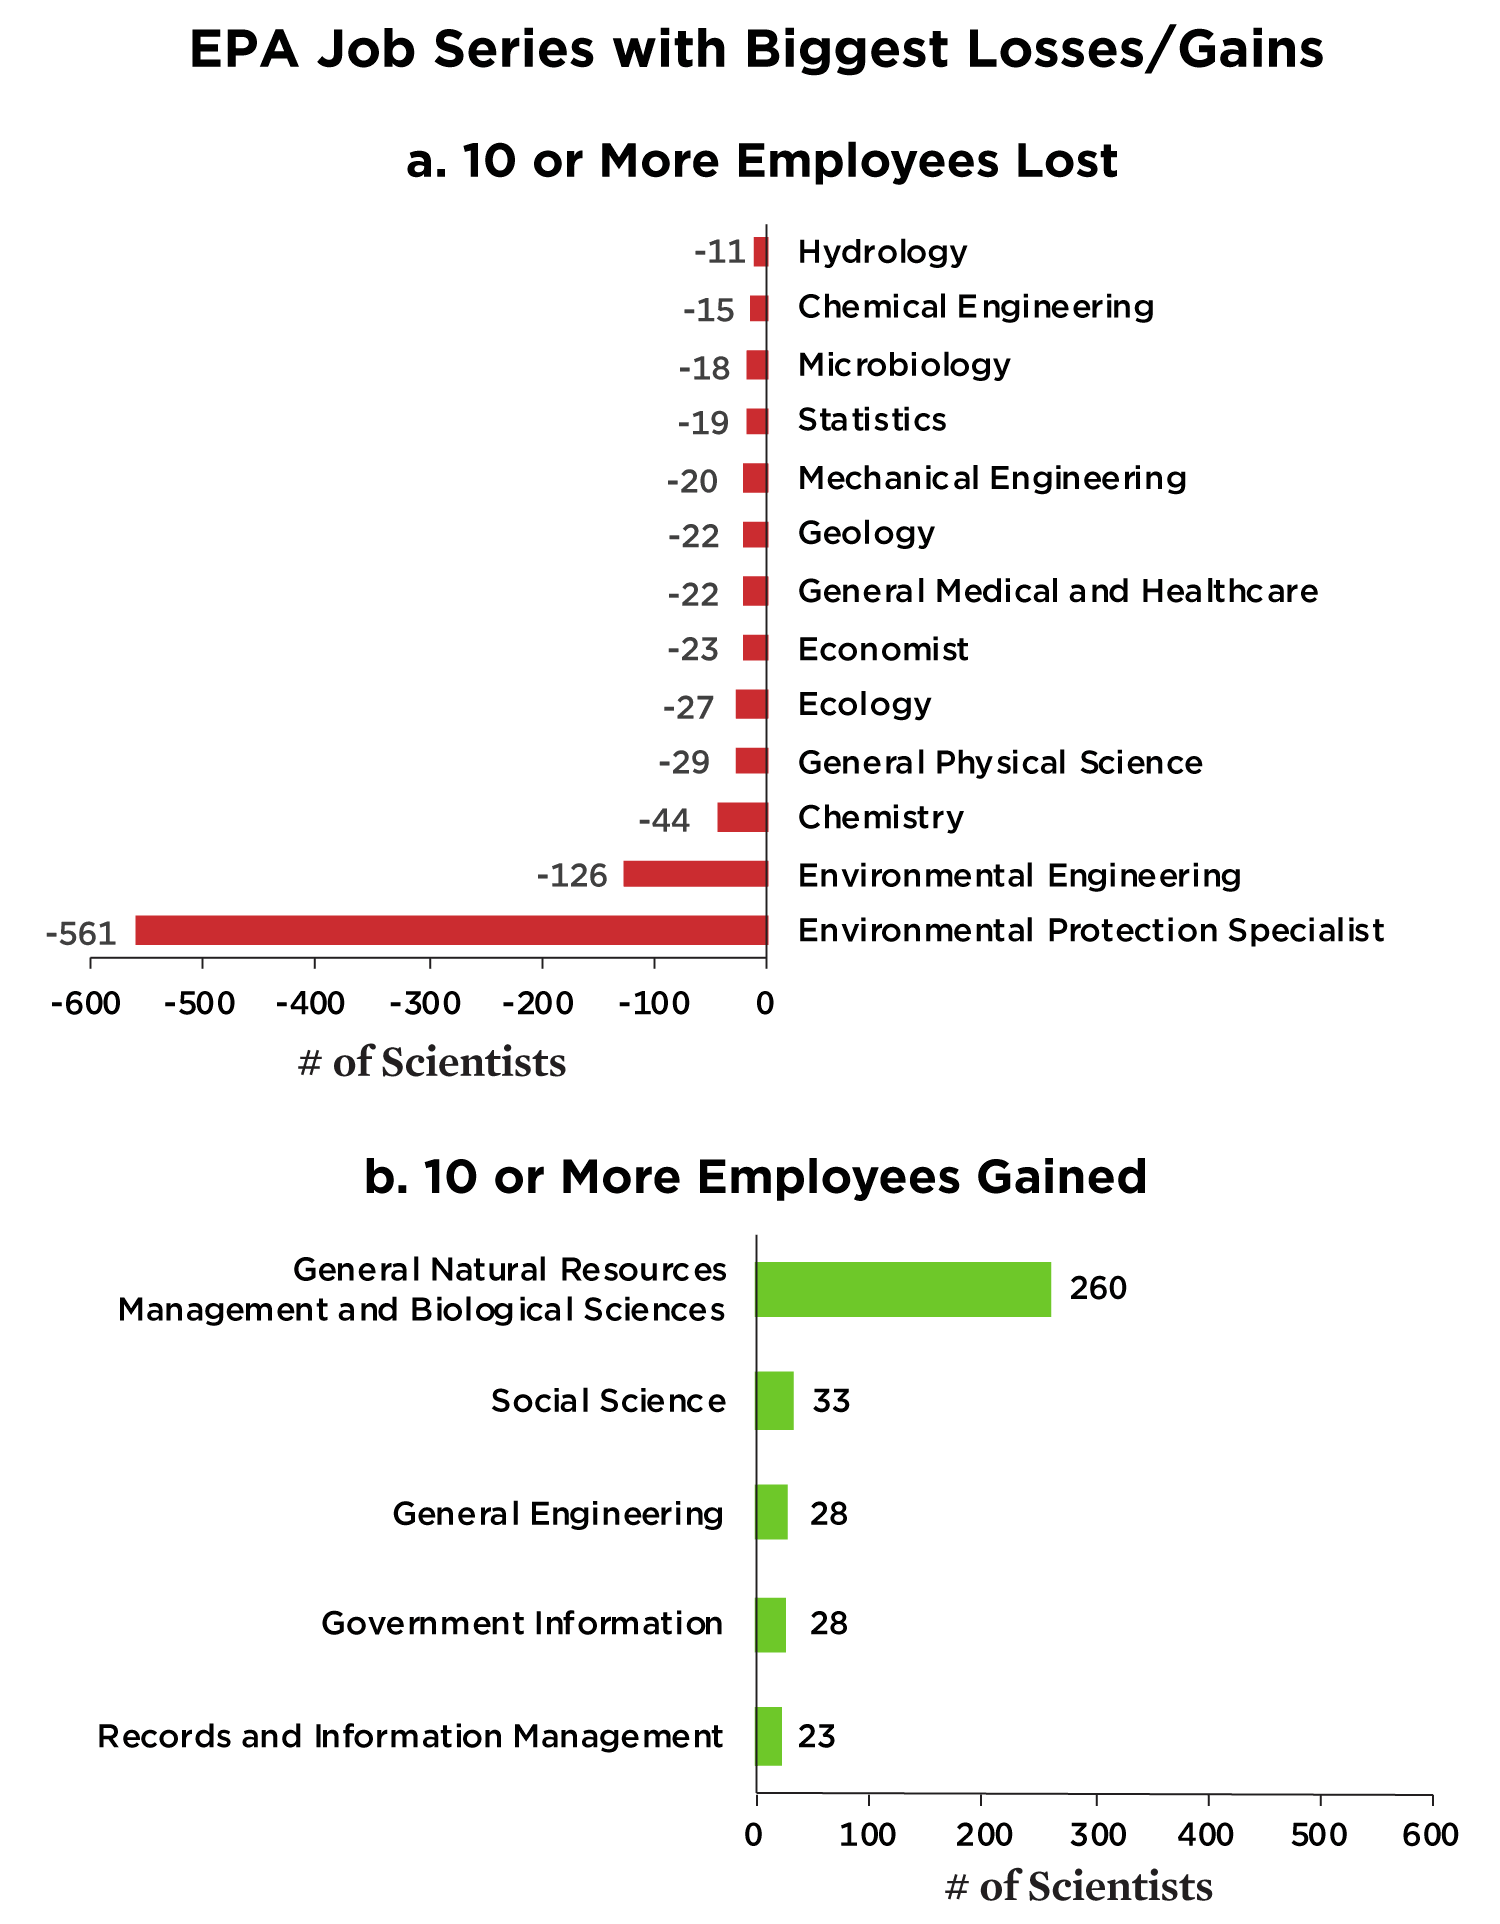 Graph showing EPA job changes by job series (category)